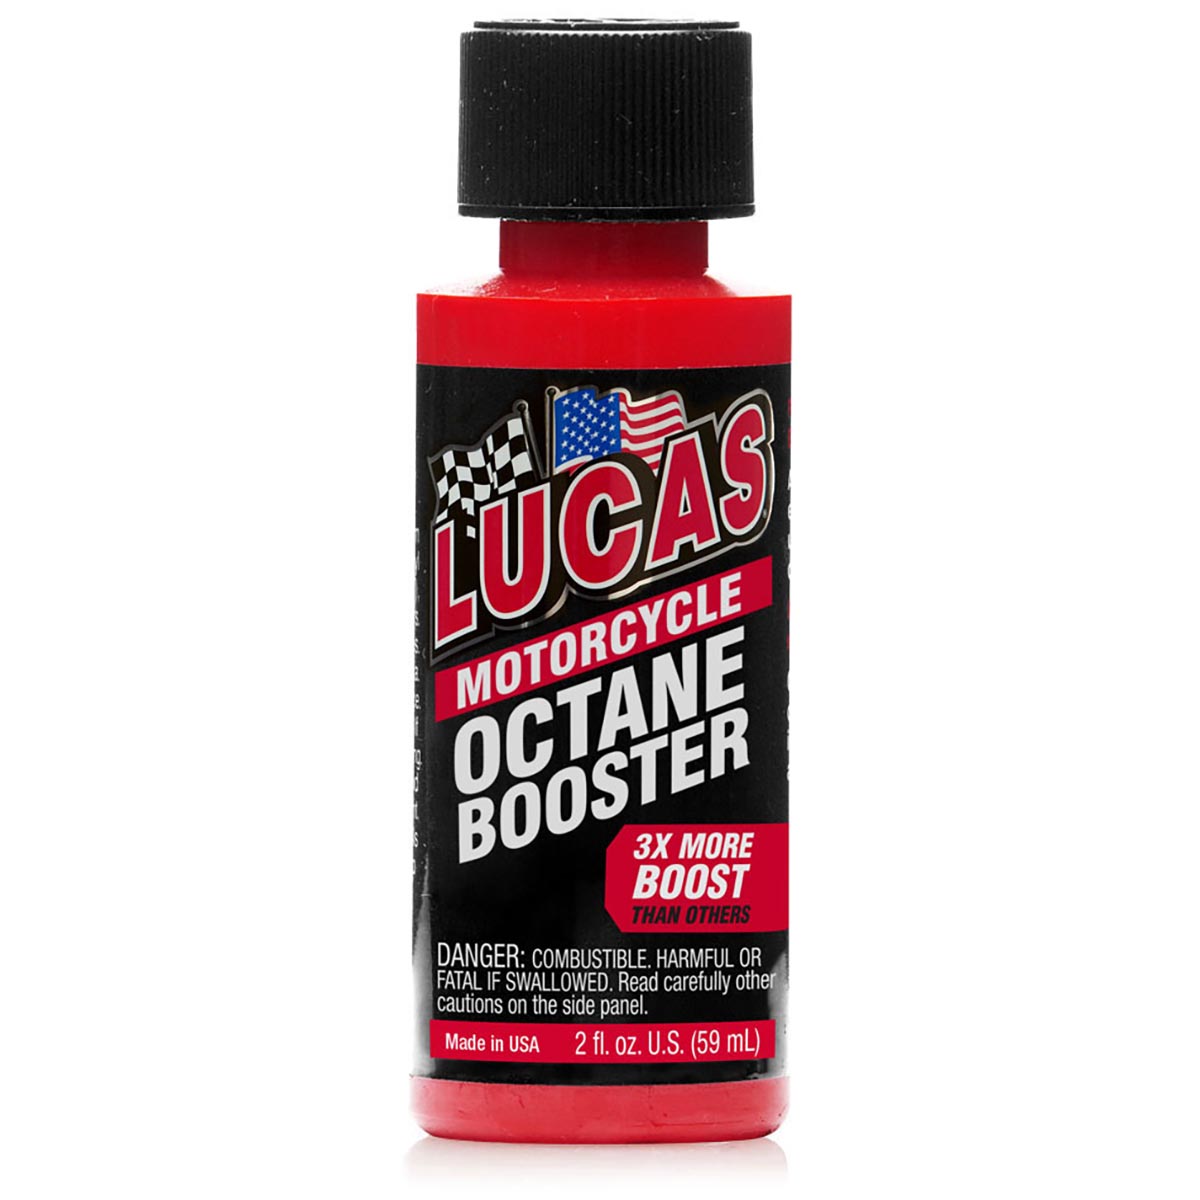 Lucas Oil Motorcycle Octane Booster - 2 Ounce